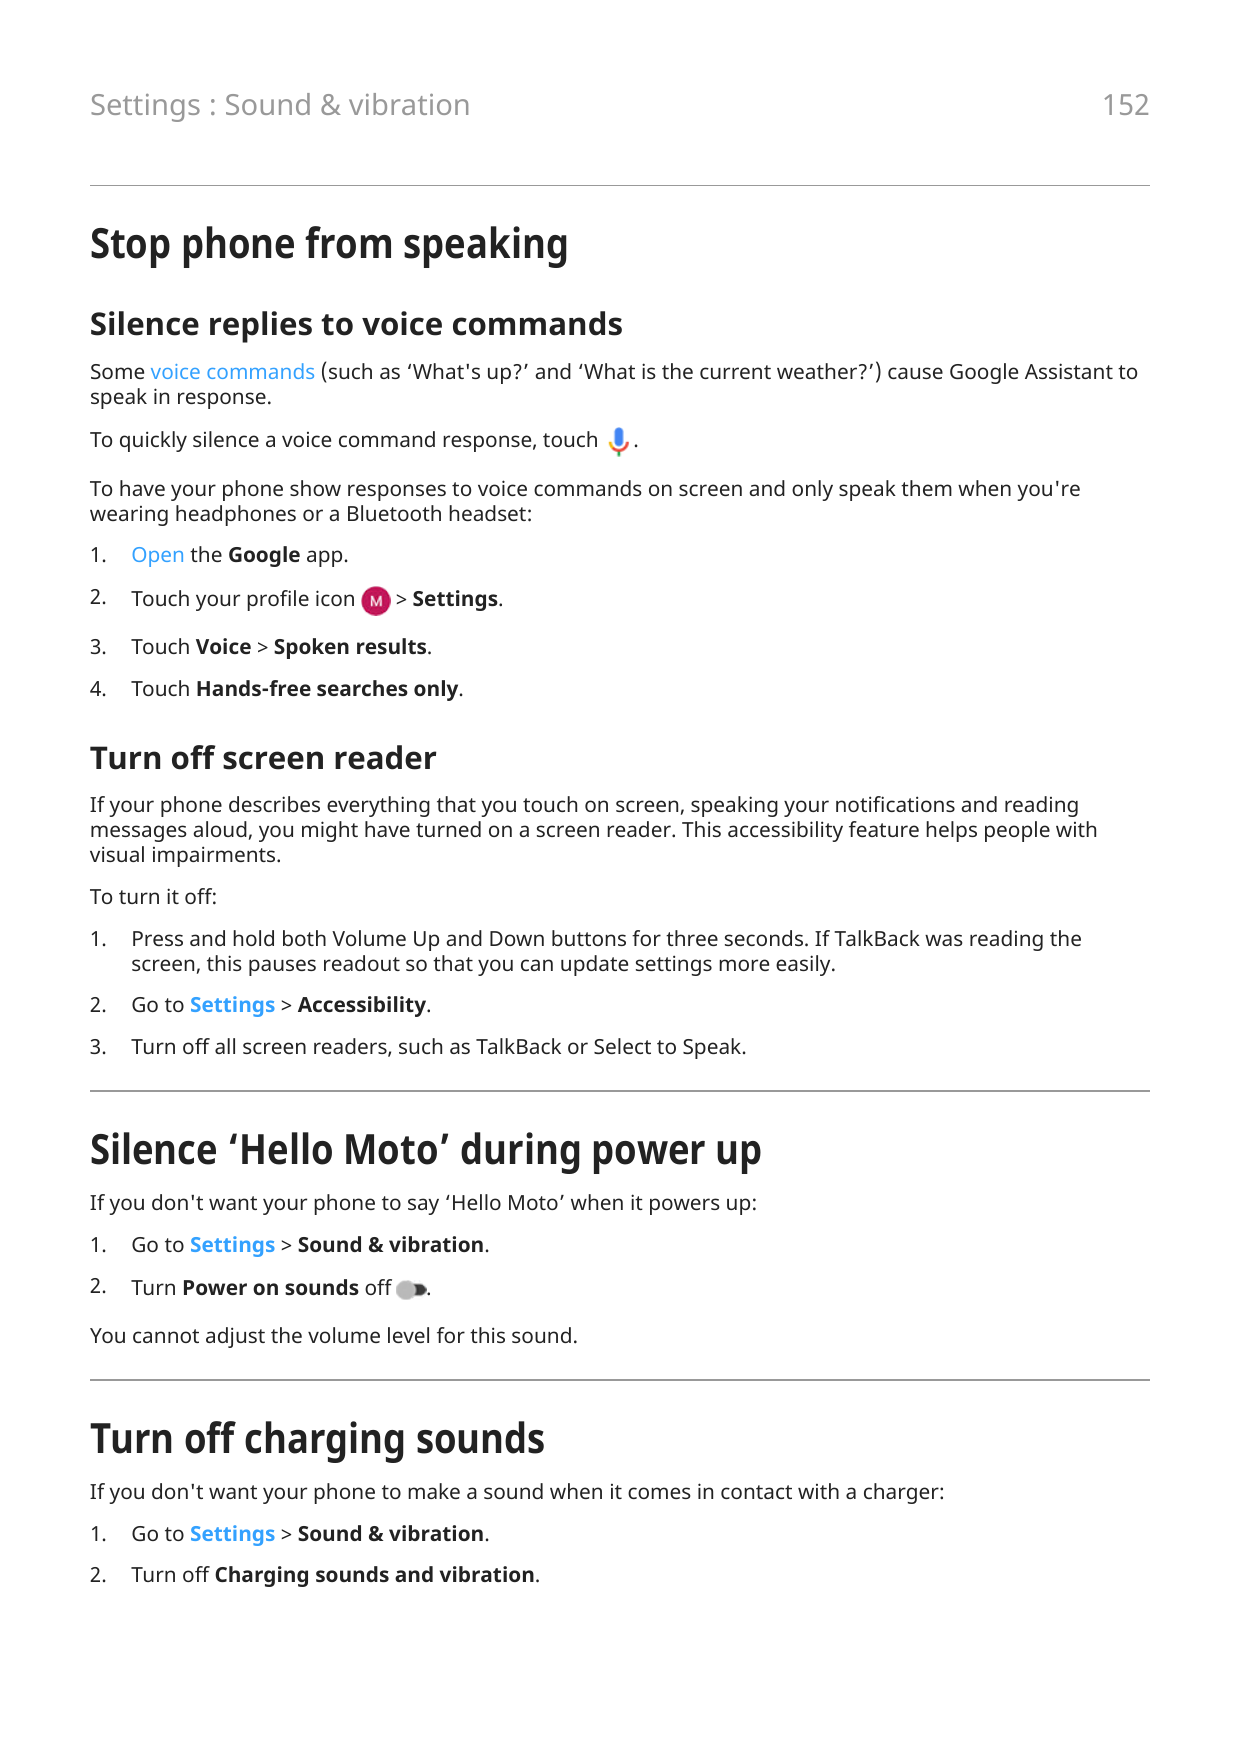 152Settings : Sound & vibrationStop phone from speakingSilence replies to voice commandsSome voice commands (such as ‘What's up?